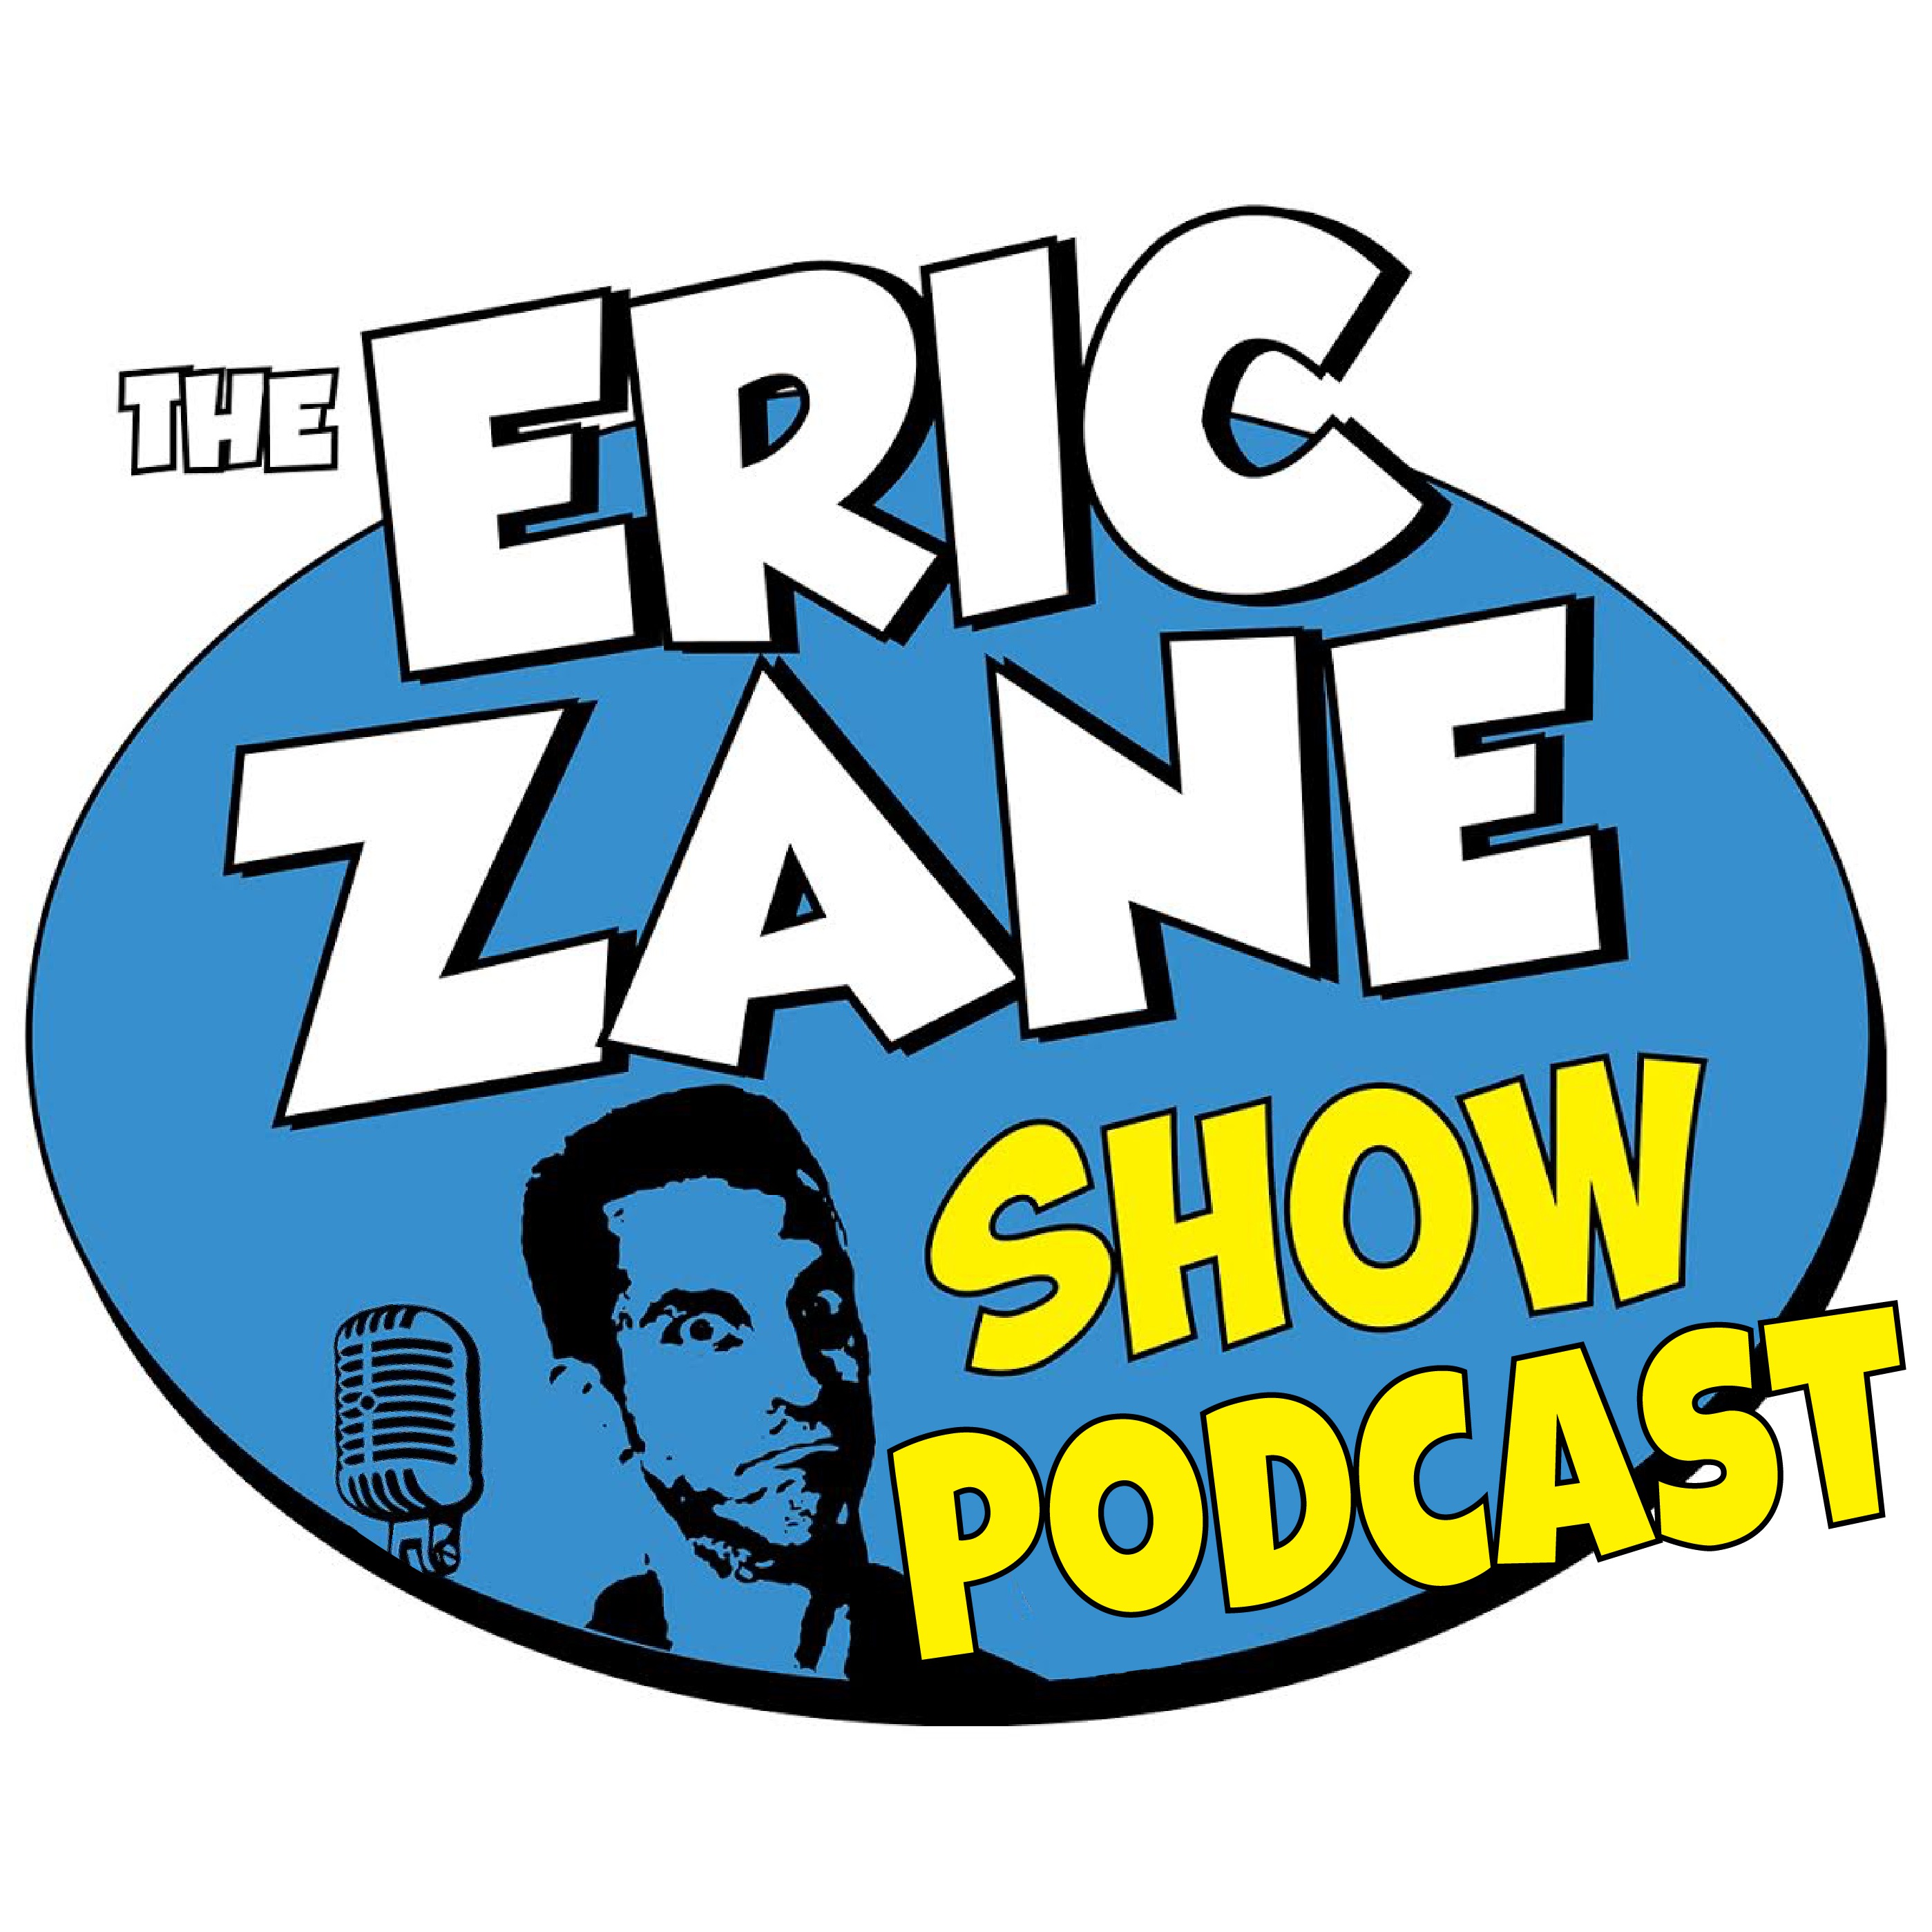 Eric Zane Show Podcast 776 We have found super soldiers to help the Ukrainians fight.